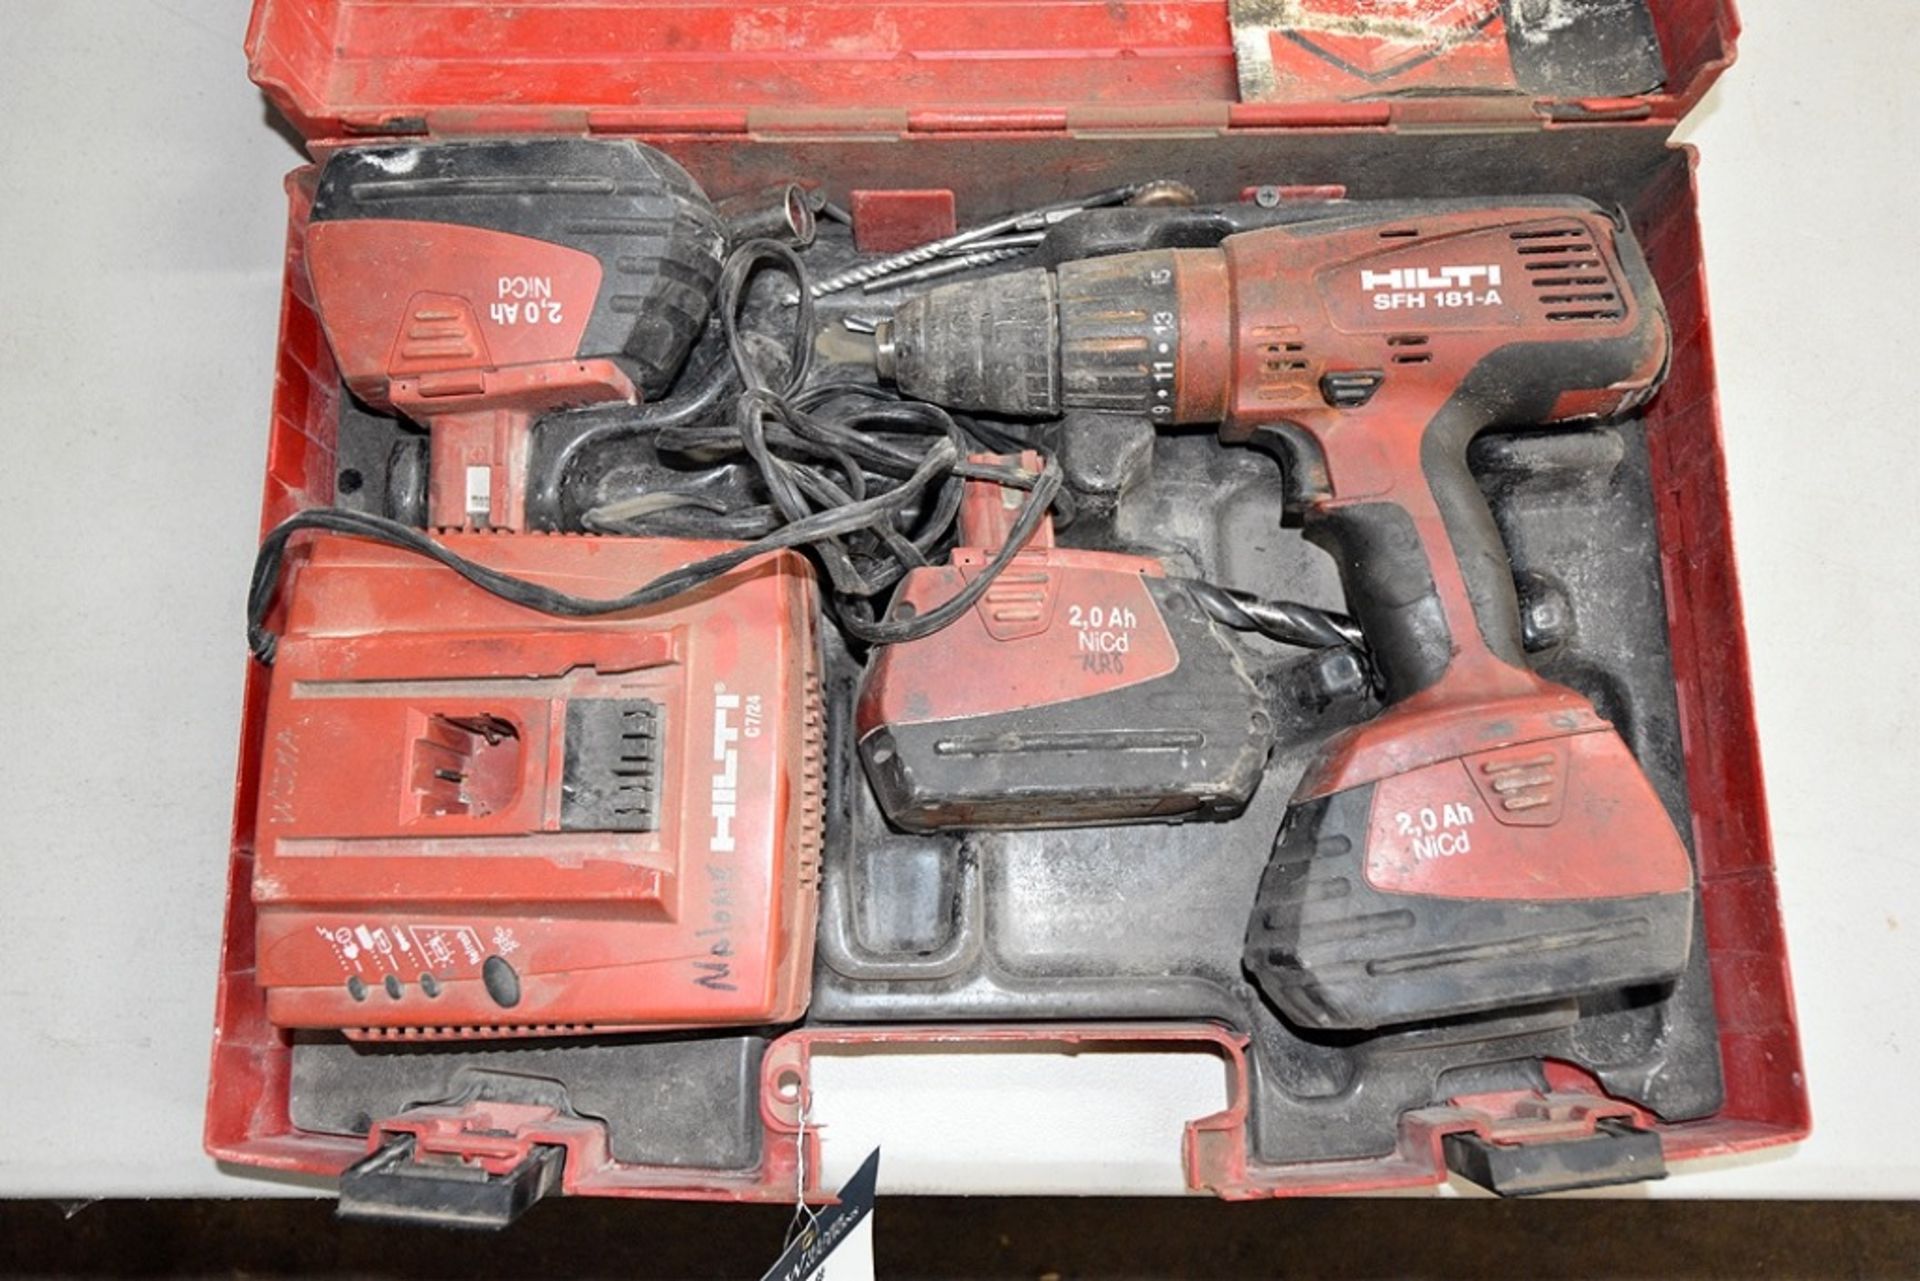 Hilti SFH 181-A Cordless Driver w/ (3) 18v NiCd Battery, (1) Charger, and (1) Case - Image 2 of 3